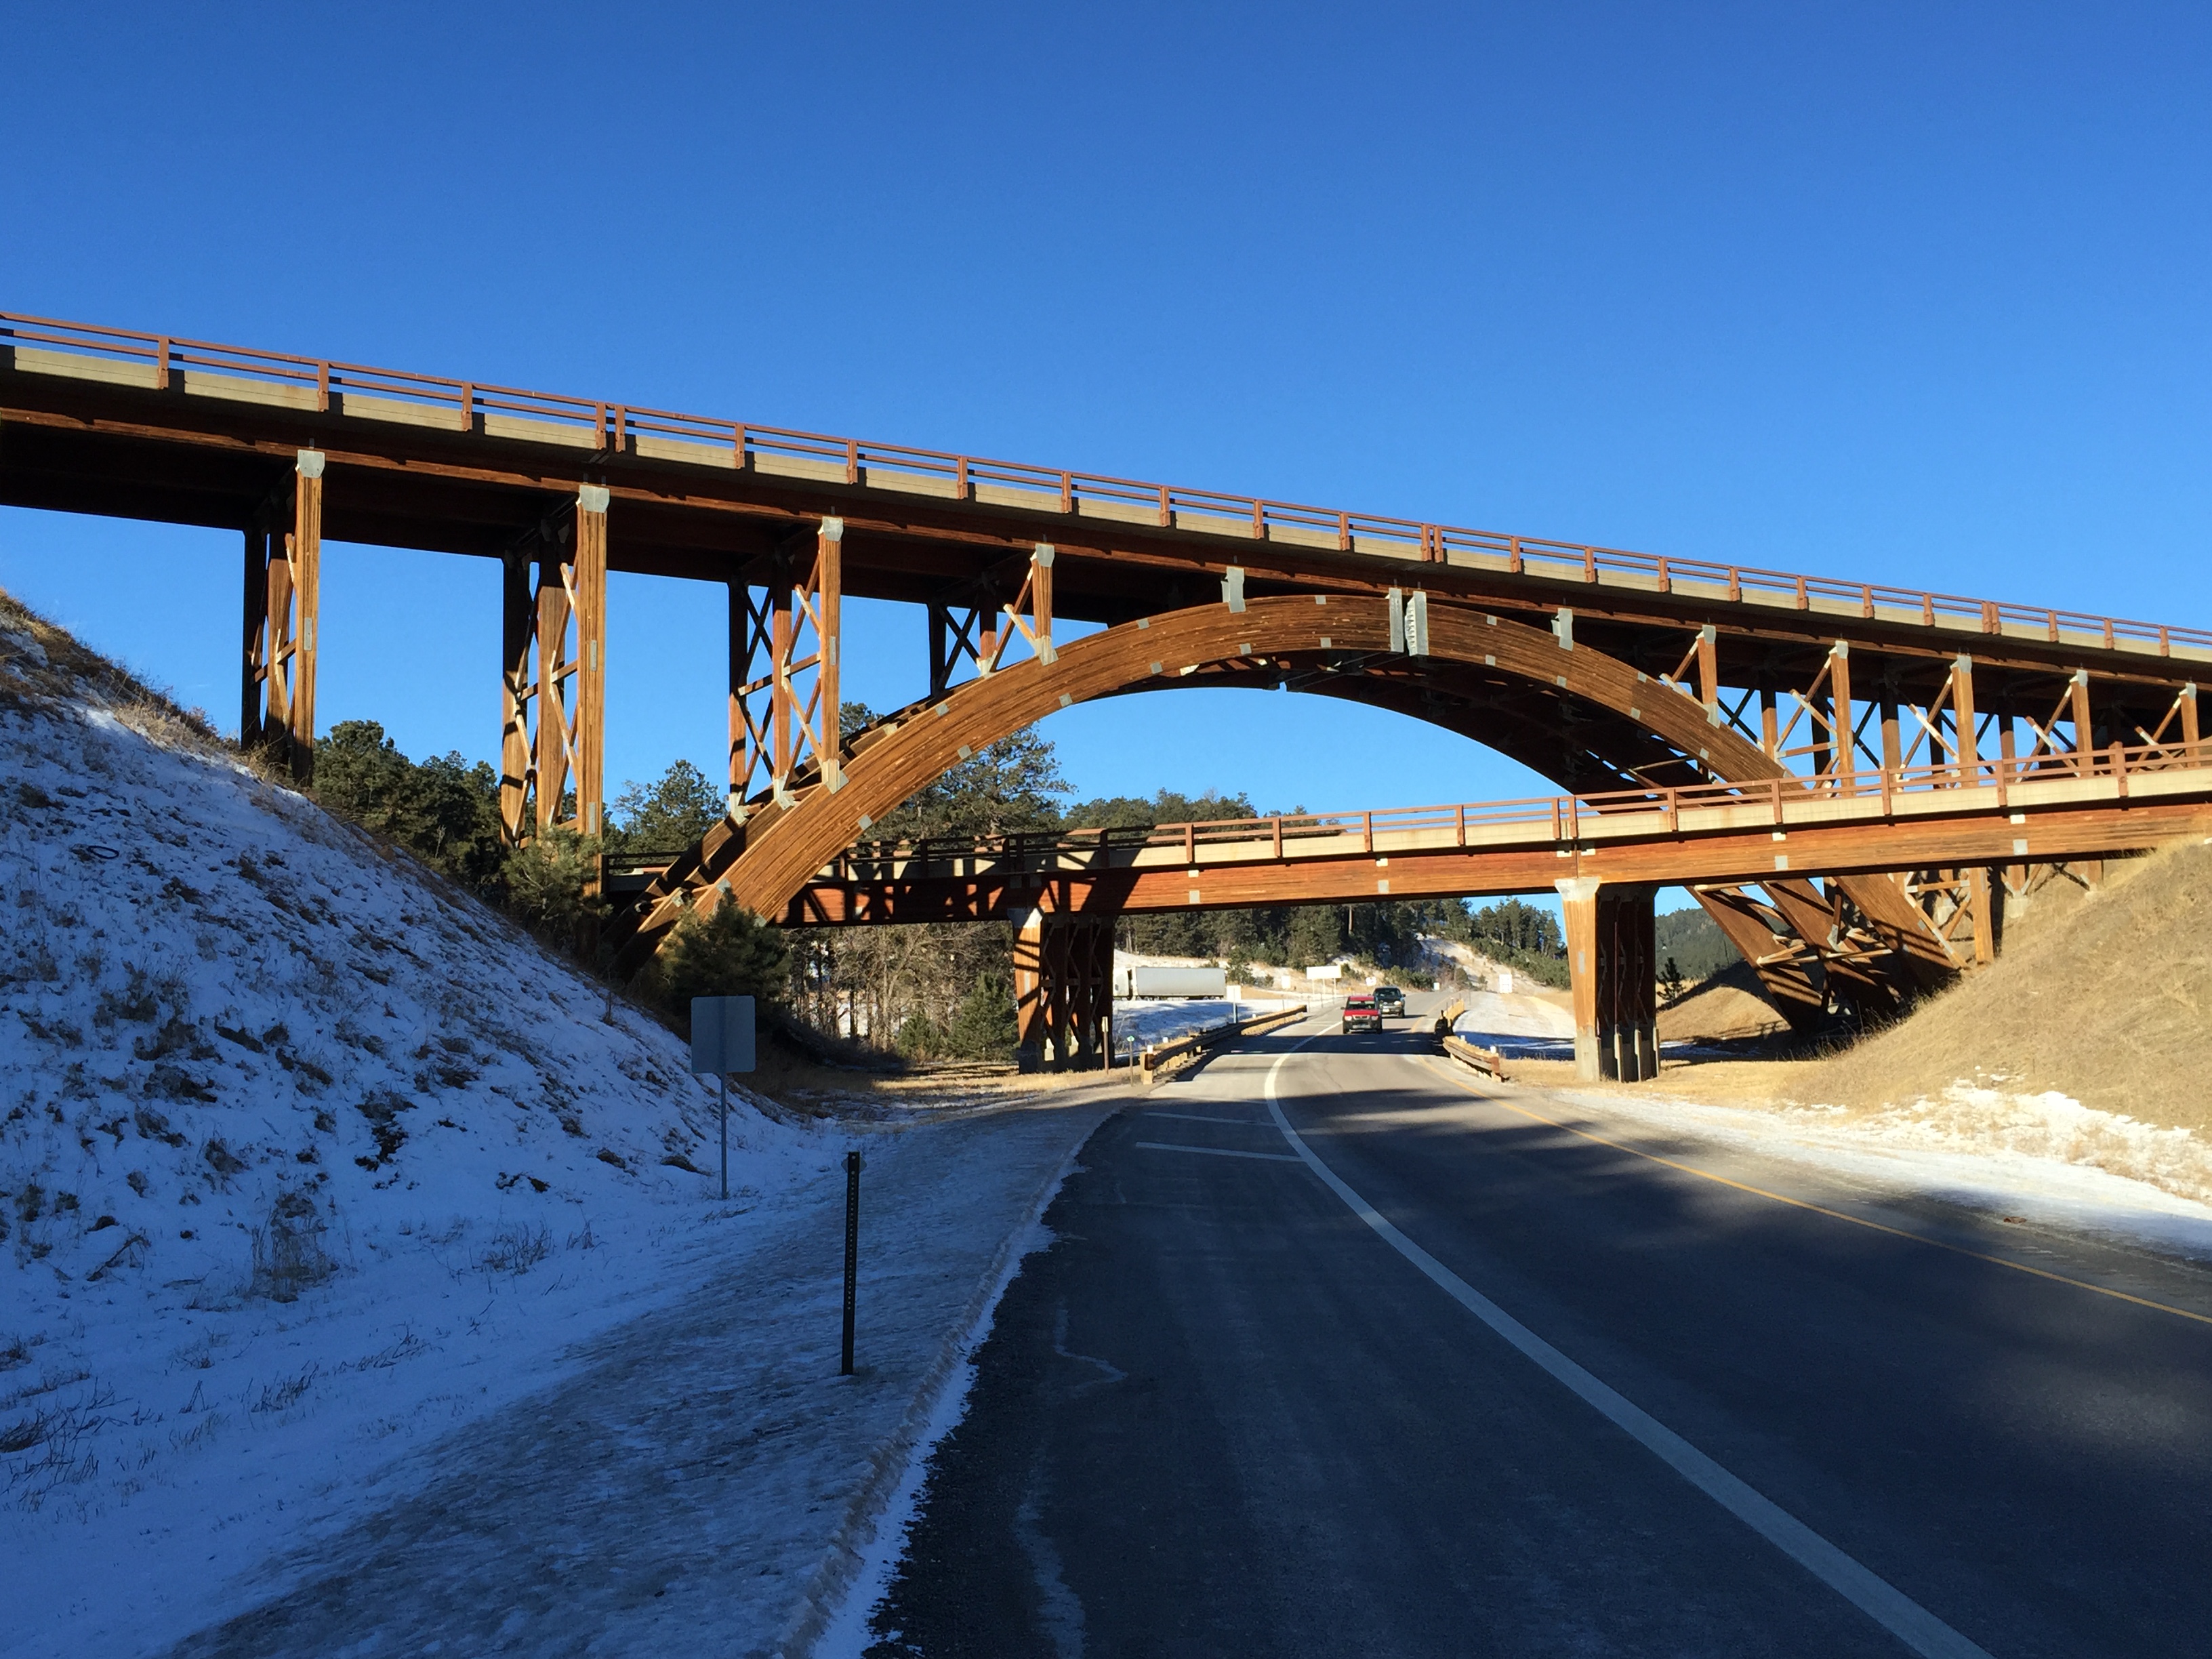 The image depicts a timber bridge in the Black Hills National Forest.